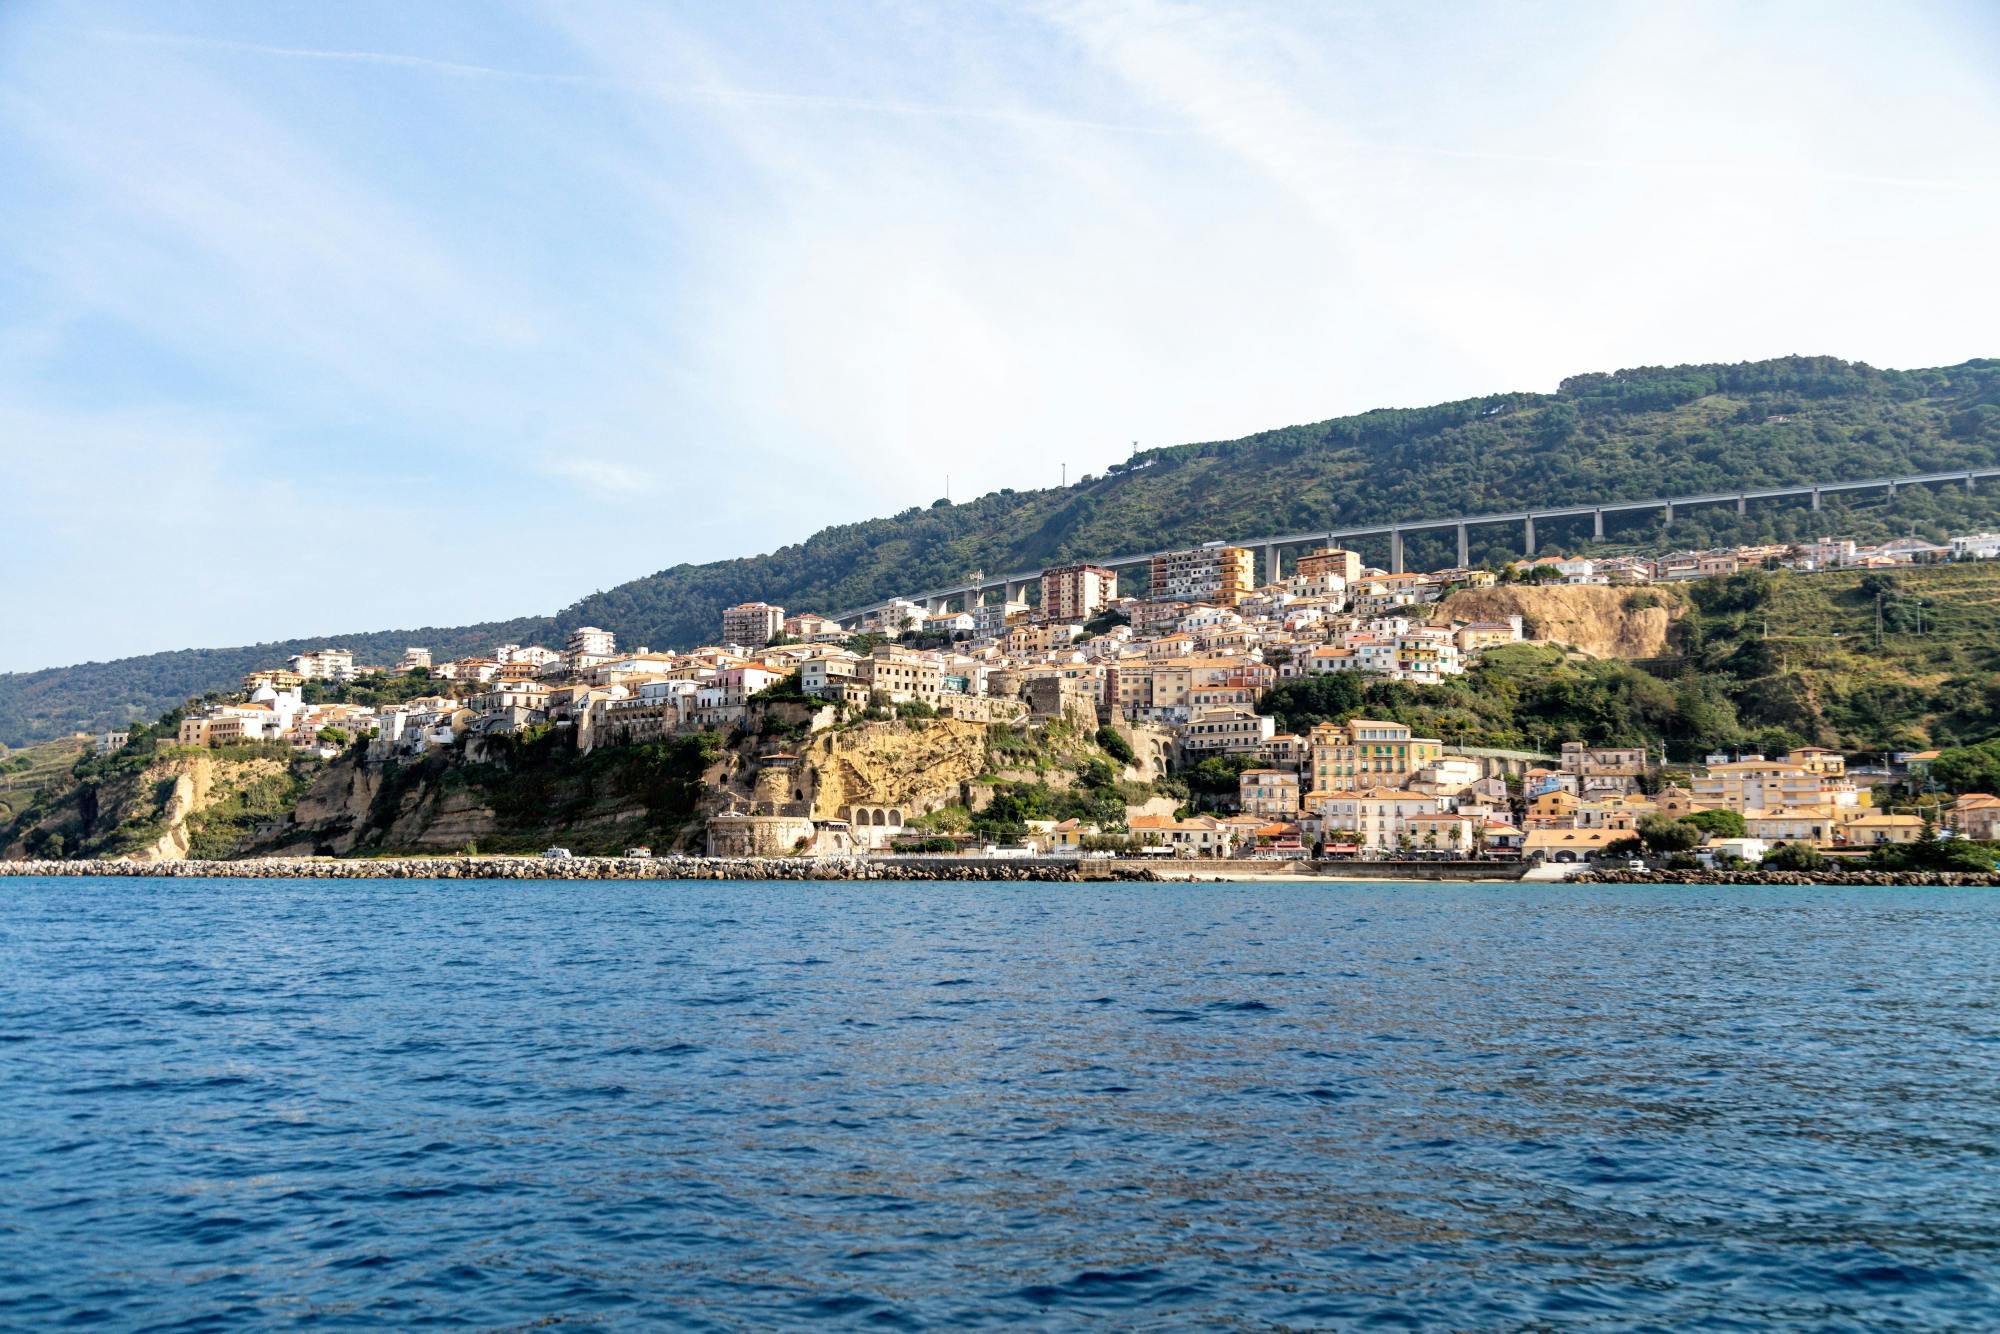 Pizzo Half-day Boat Tour